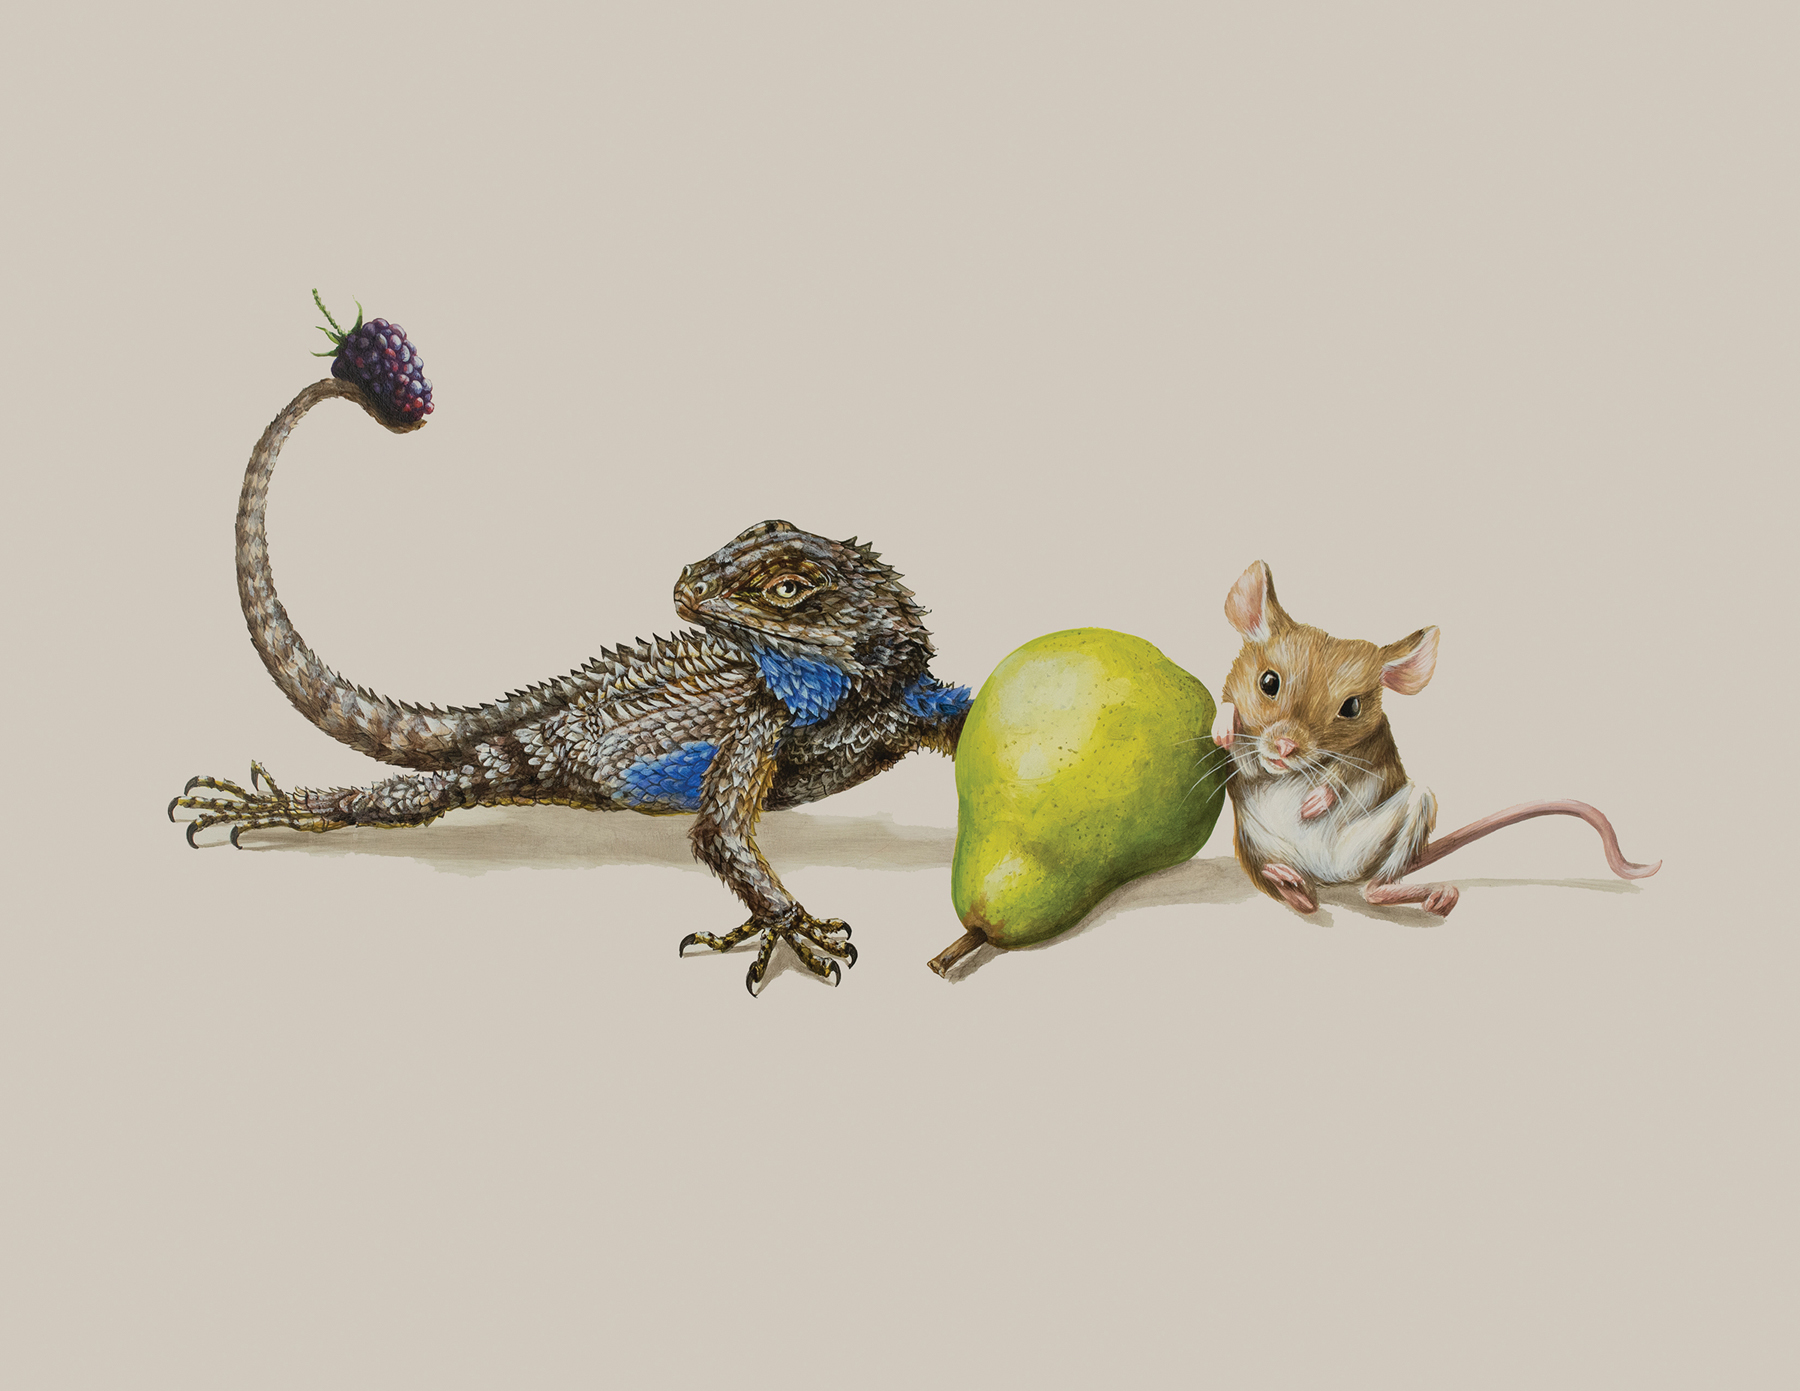 Tricia George: The Bluebellied Lizard and The Mouse